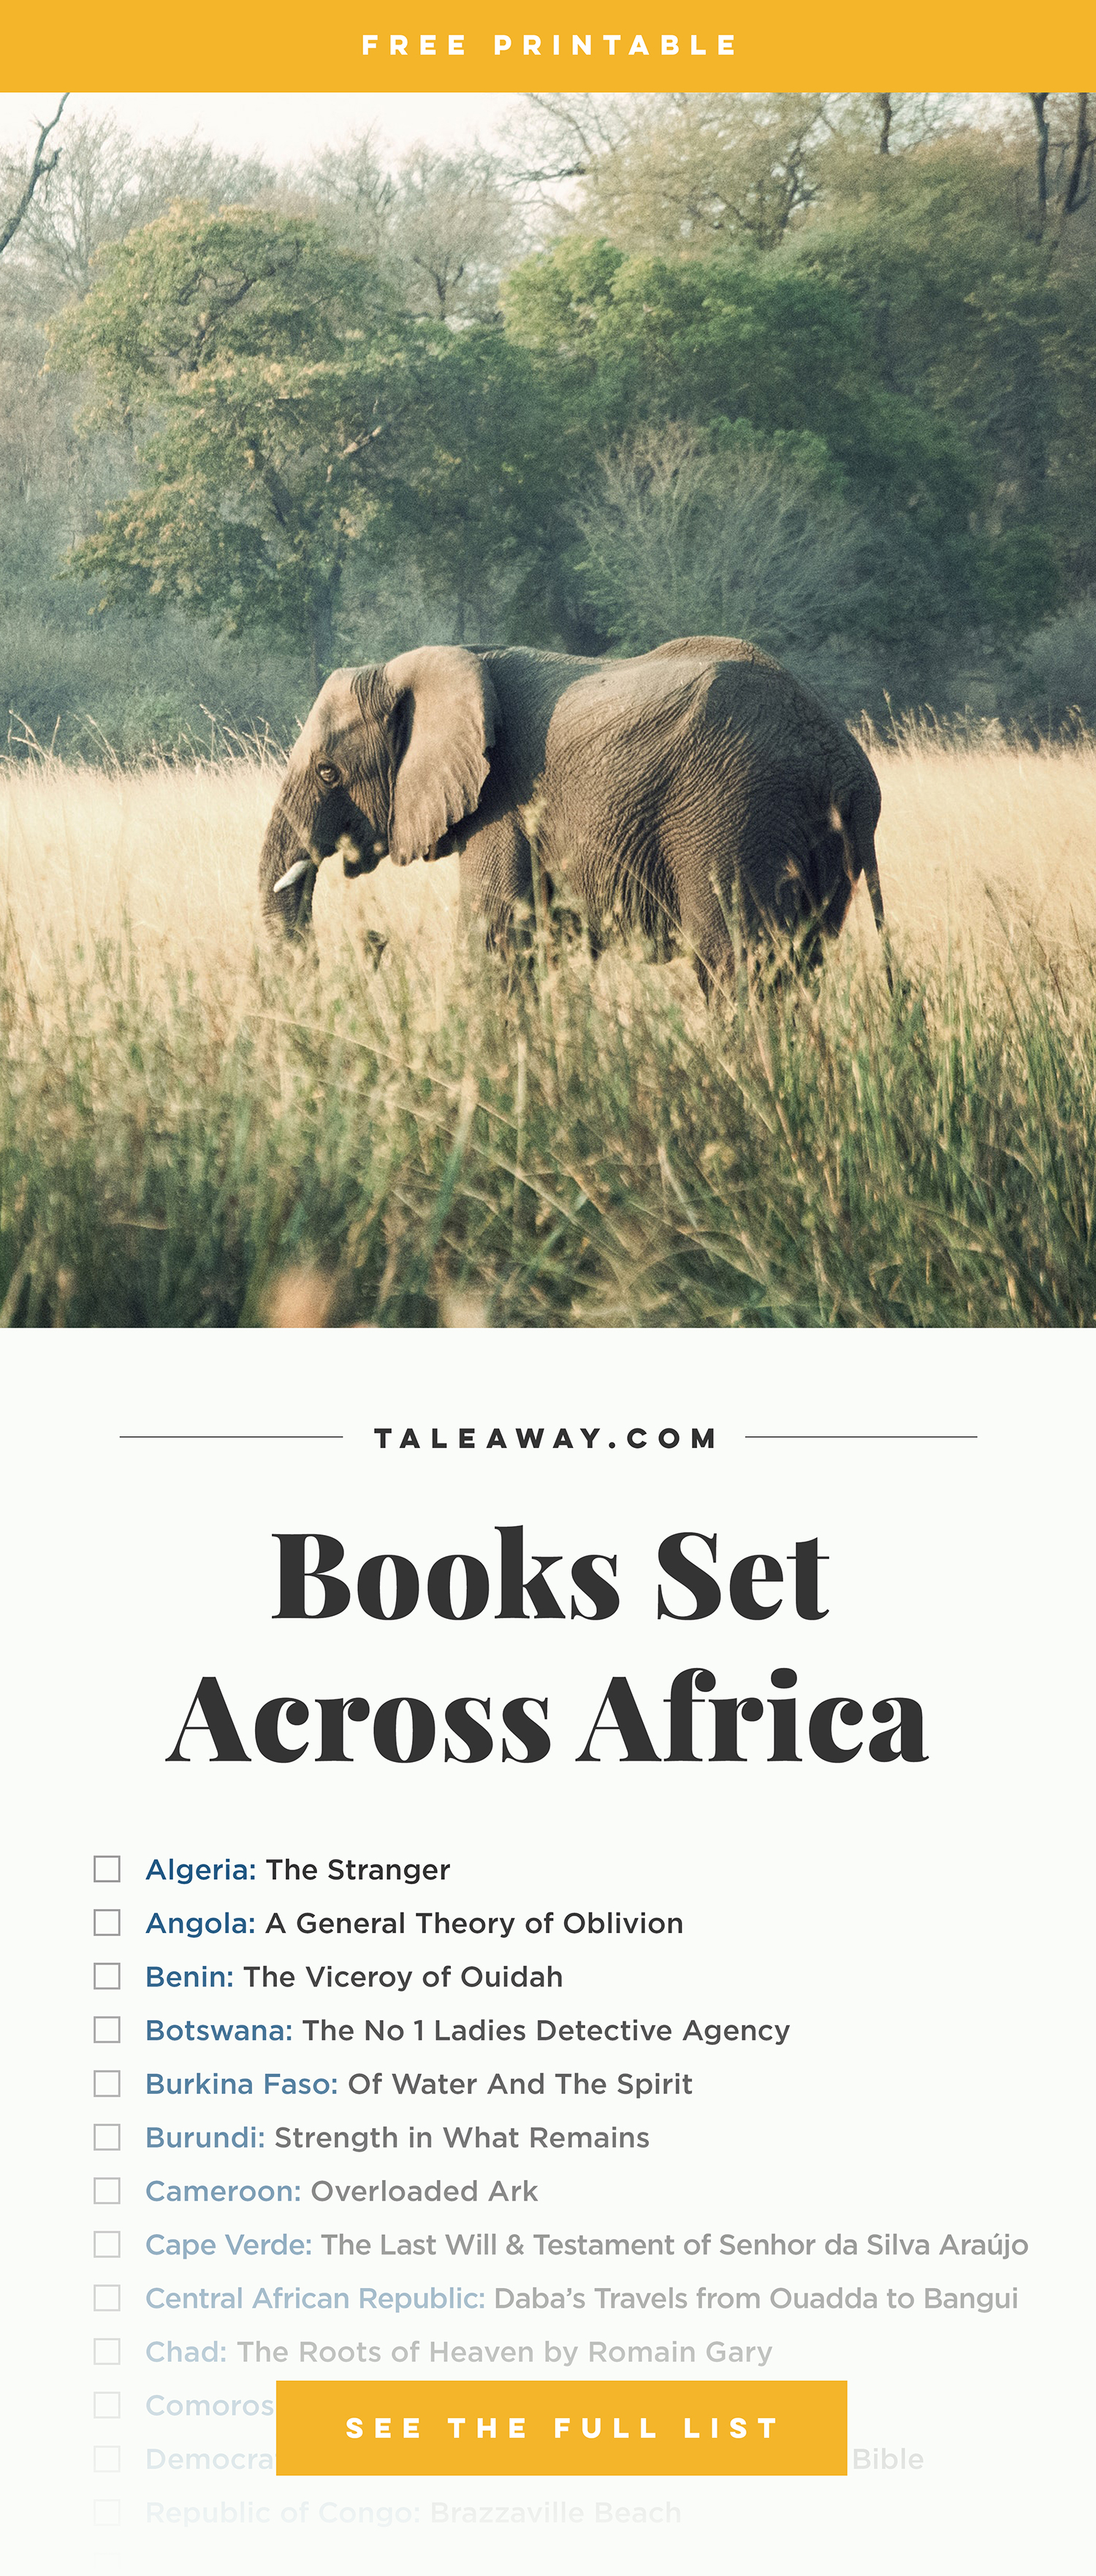 Books Set In Africa - Visit www.taleway.com to find books set around the world. africa books, african books, books african authors, africa novels, africa literature, africa culture, africa travel, africa book cover, africa reading challenge, african books to read, africa reading list, africa travel, best african books, books by african authors, books for travel lovers, travel reads, travel reading list, reading list, reading challenge, books around the world